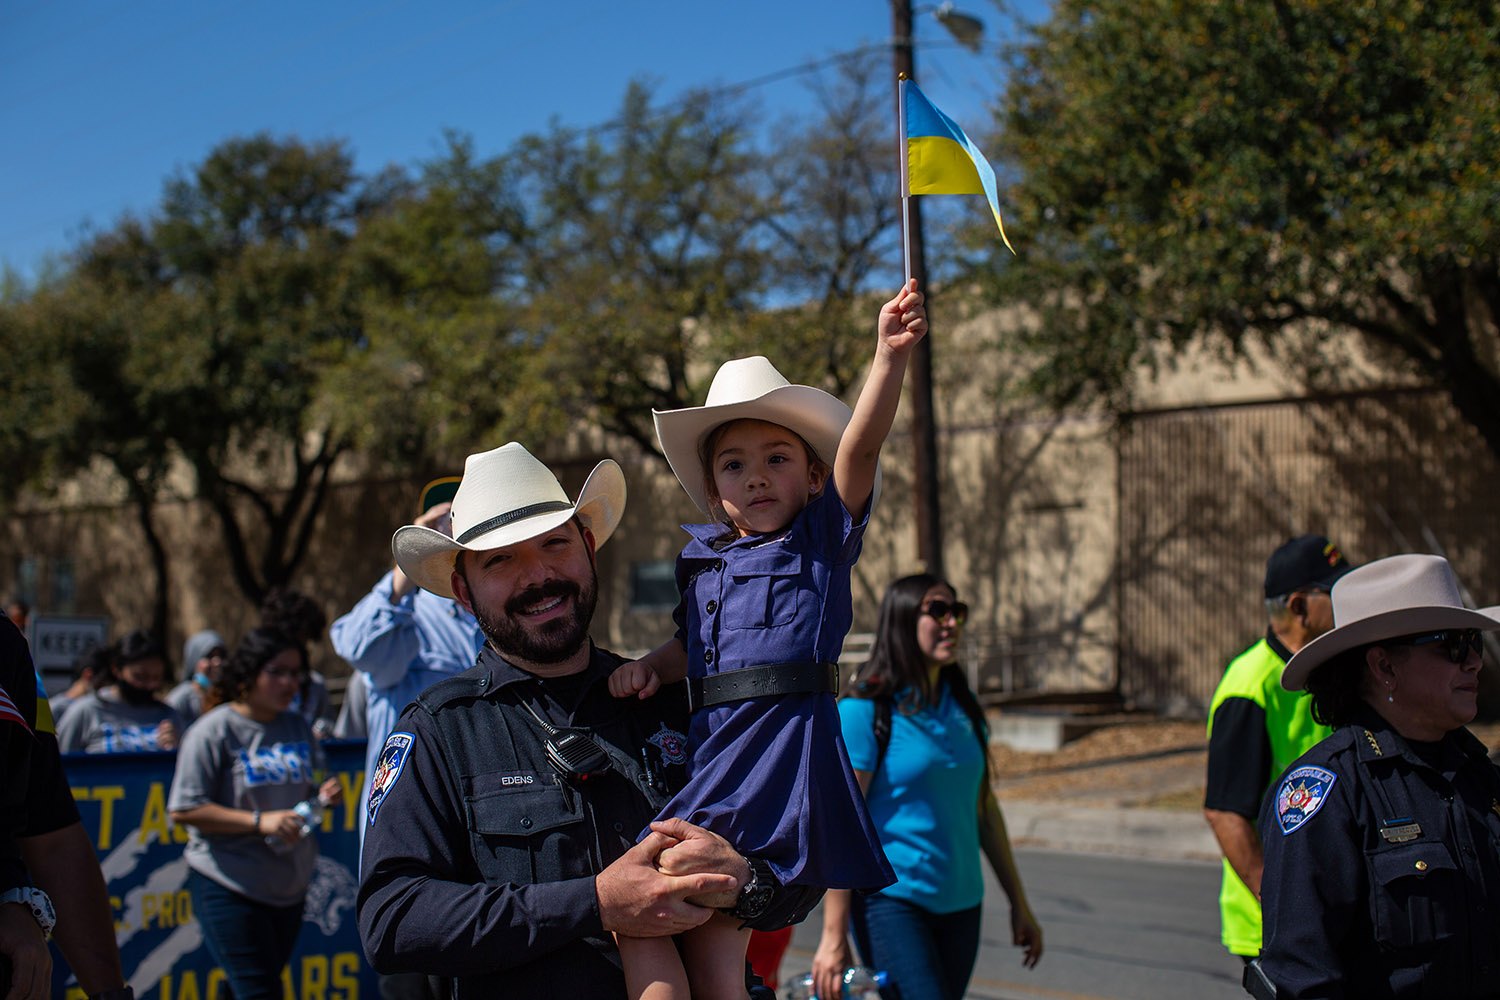 Bexar County Constable Deputy Cory Edens and his daughter, Scarlette, march in the 26th annual Cesar E. Chavez March for Justice through downtown San Antonio, Texas, on Saturday, March 26, 2022. Photo by Kaylee Greenlee Beal | Heron contributor